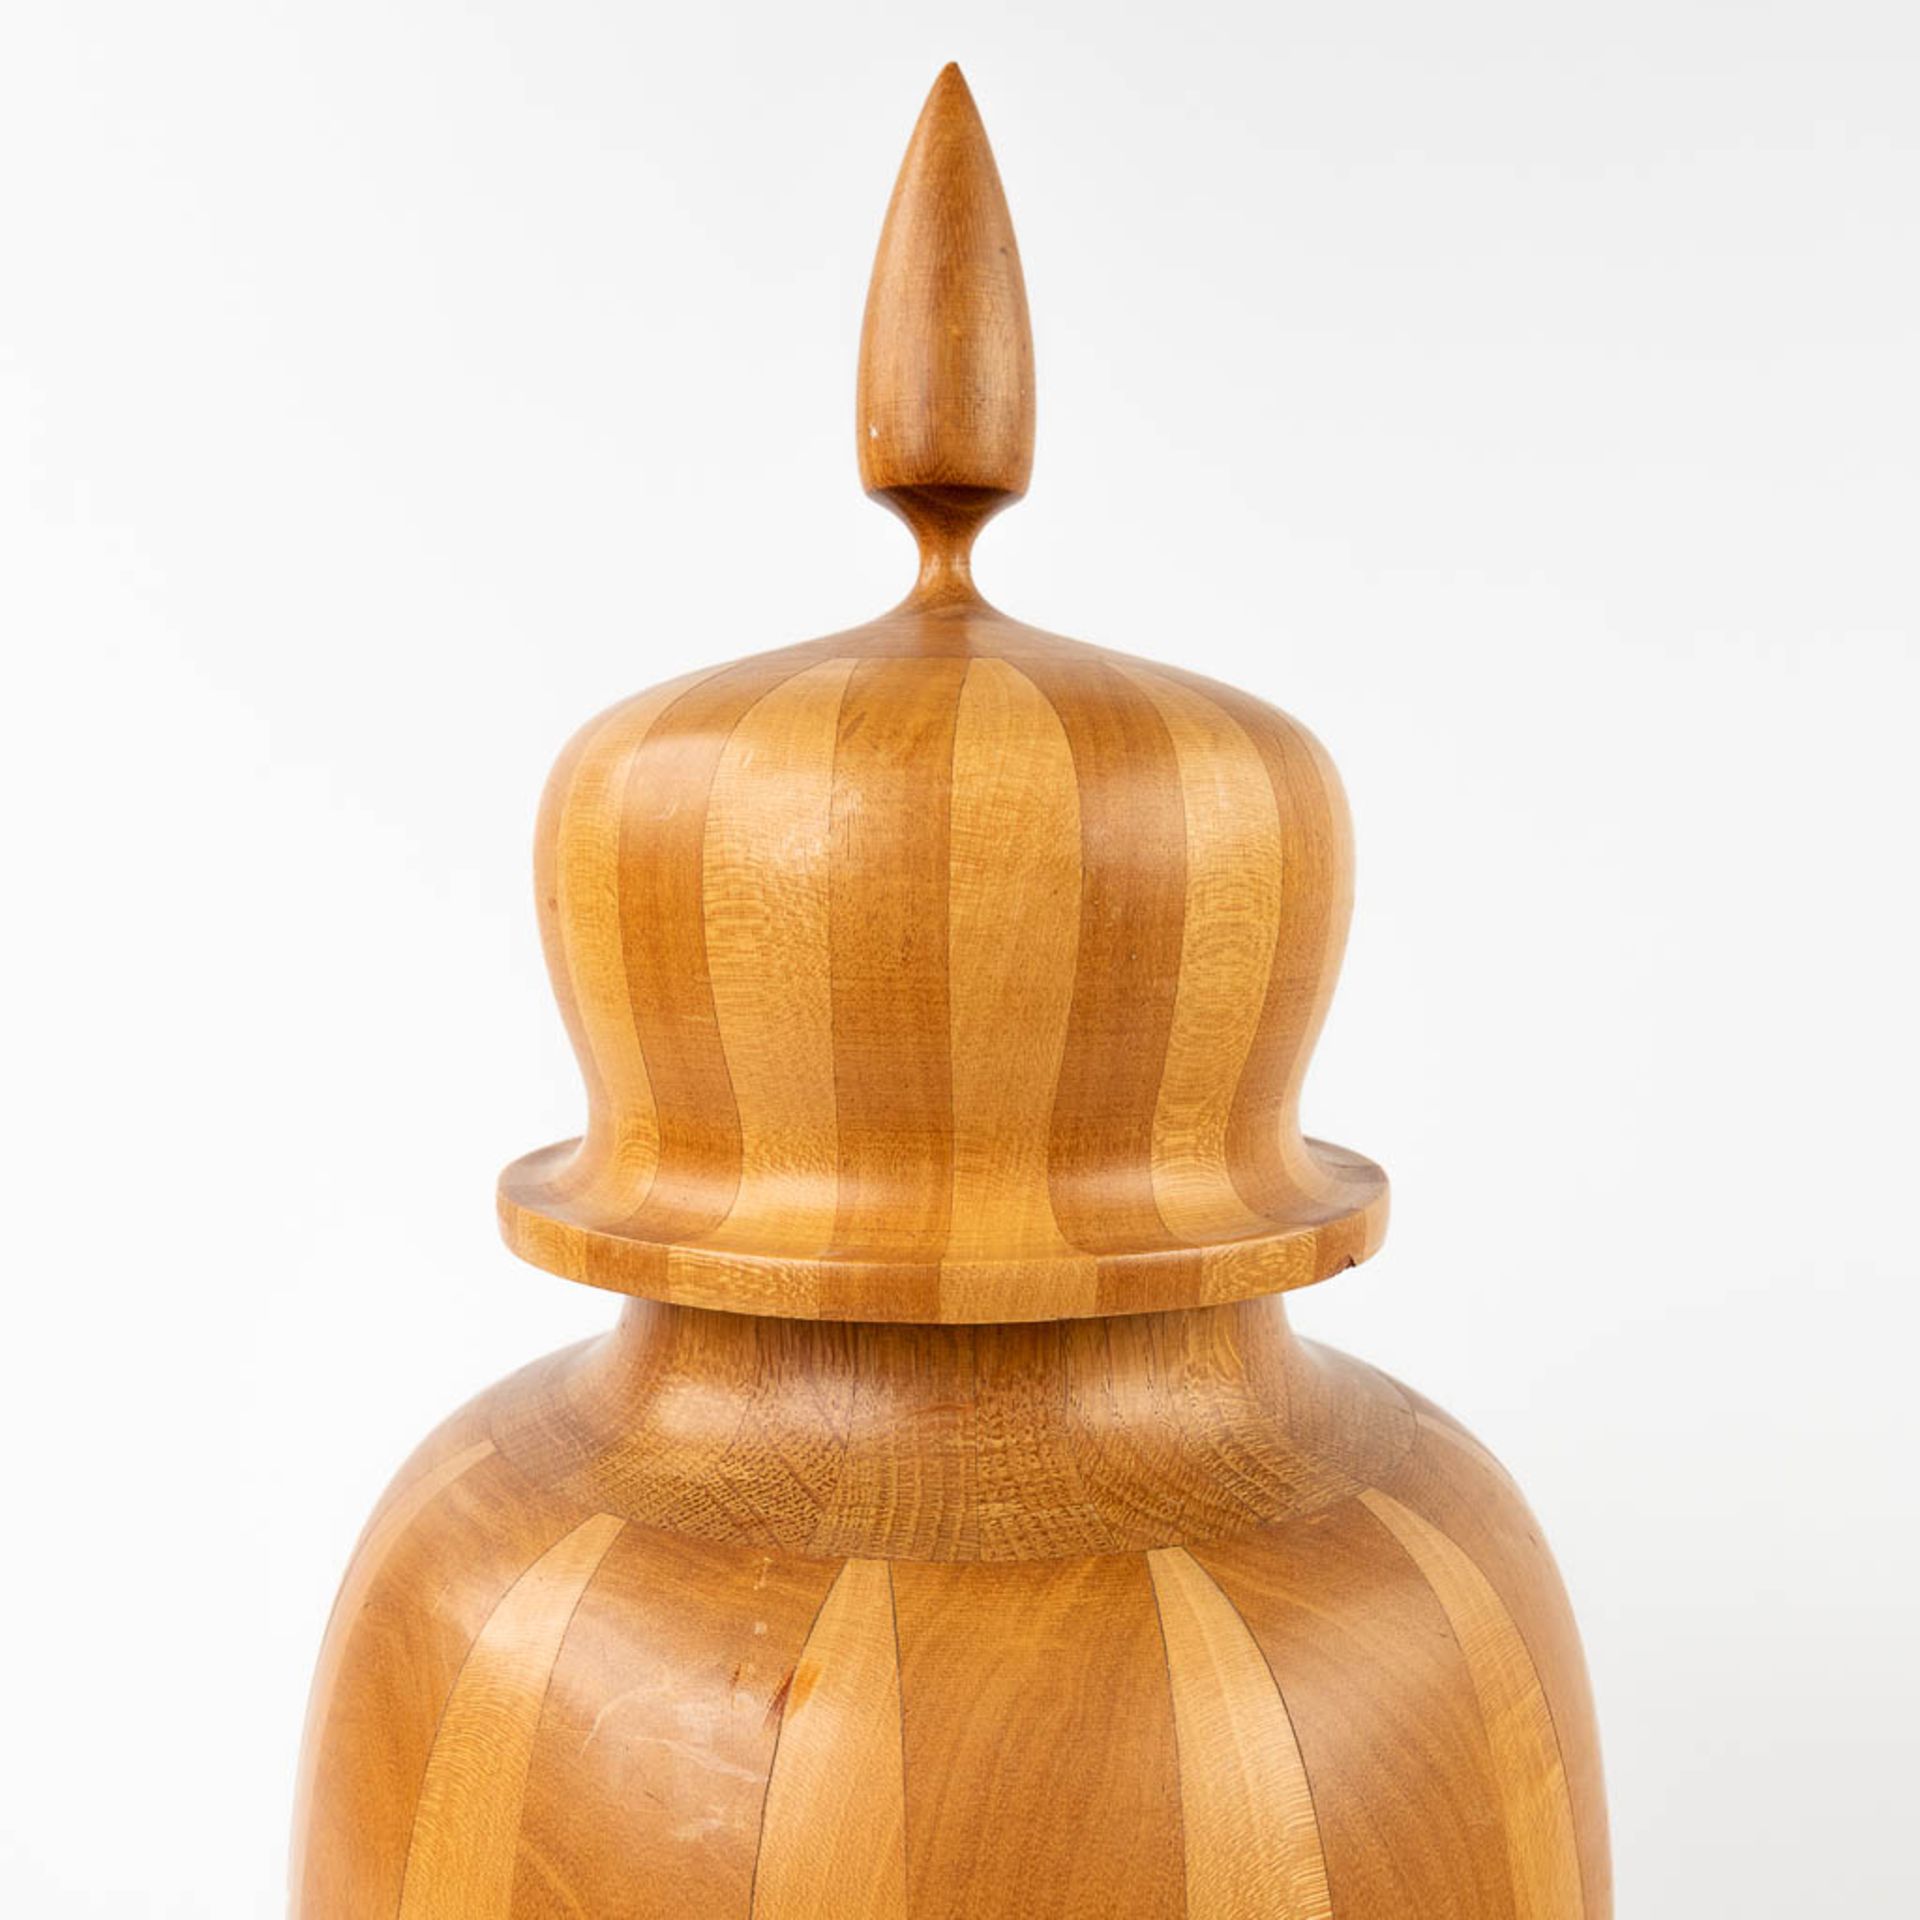 A collection of 2 wood-turned vases, made of wood. circa 1960. (H: 43 x D: 16 cm) - Image 9 of 11